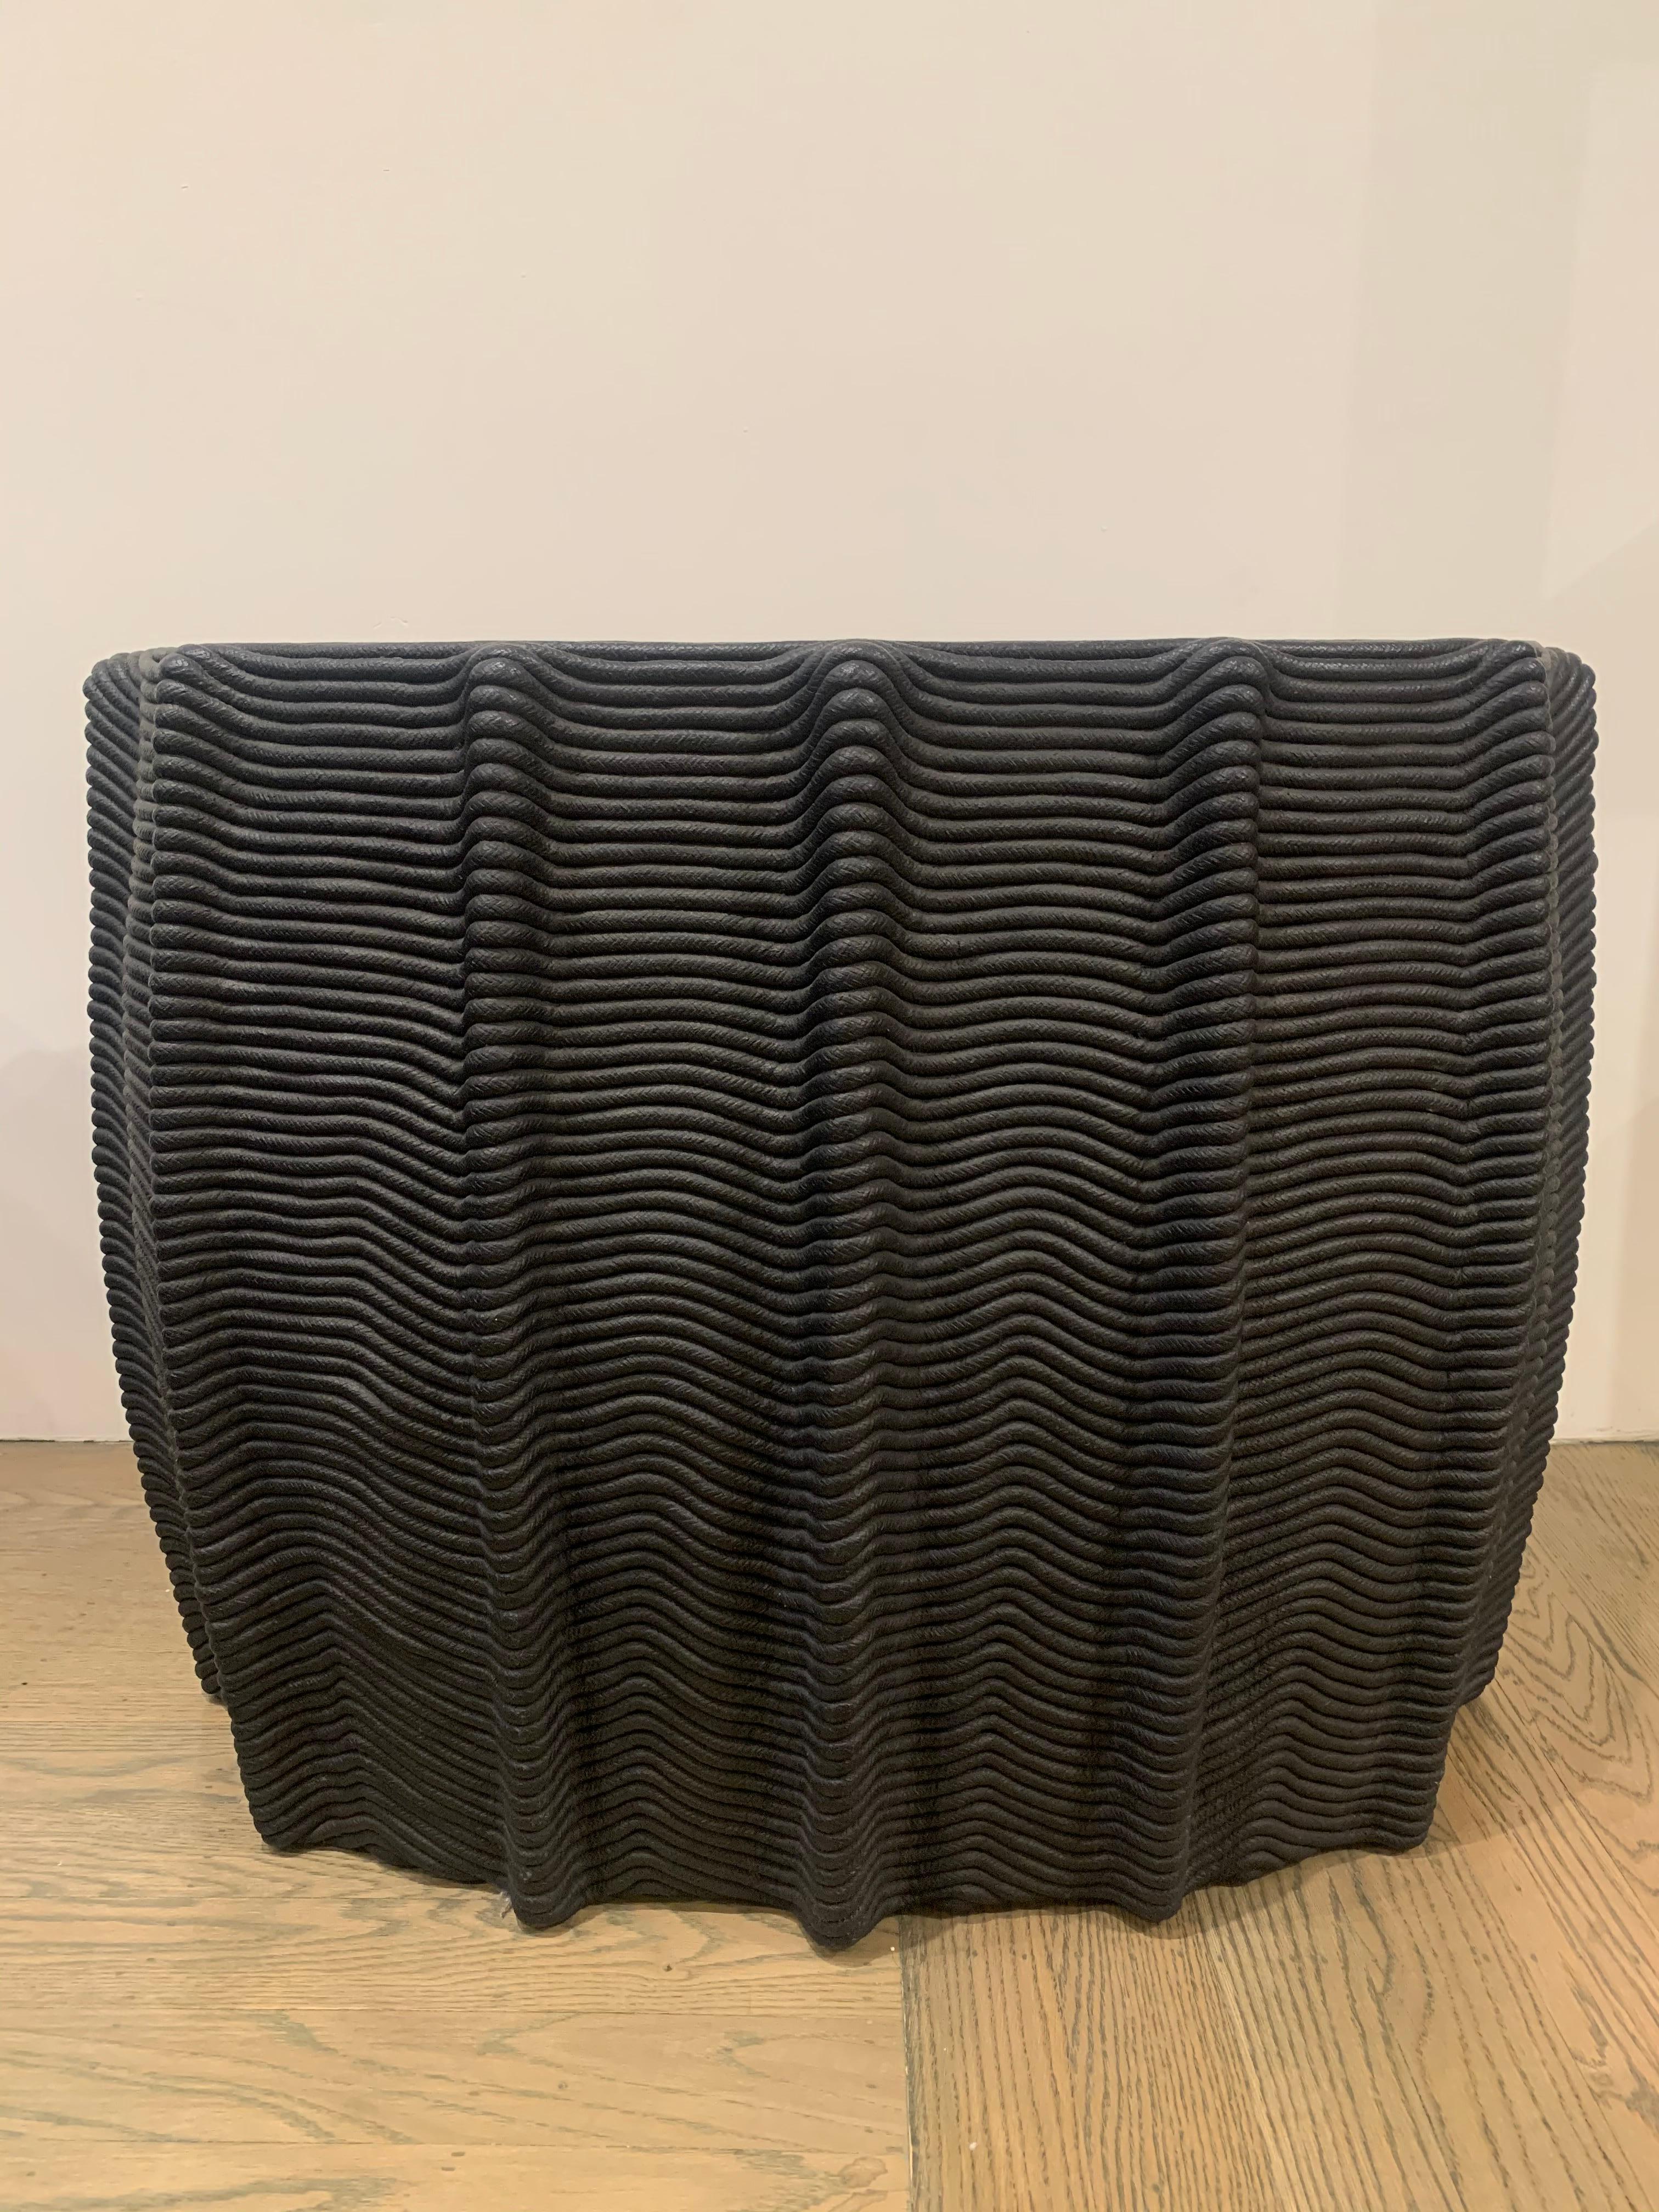 HOLLY HUNT Mivale HH024302 side table in black cotton cord by Christian Astuguevieille

Additional Information:
Materials: Black painted cotton cord
Dimensions: 33.5 W x 19.7 D x 25.6 H inch
Available in other finish options: Ceruleum Blue Cotton